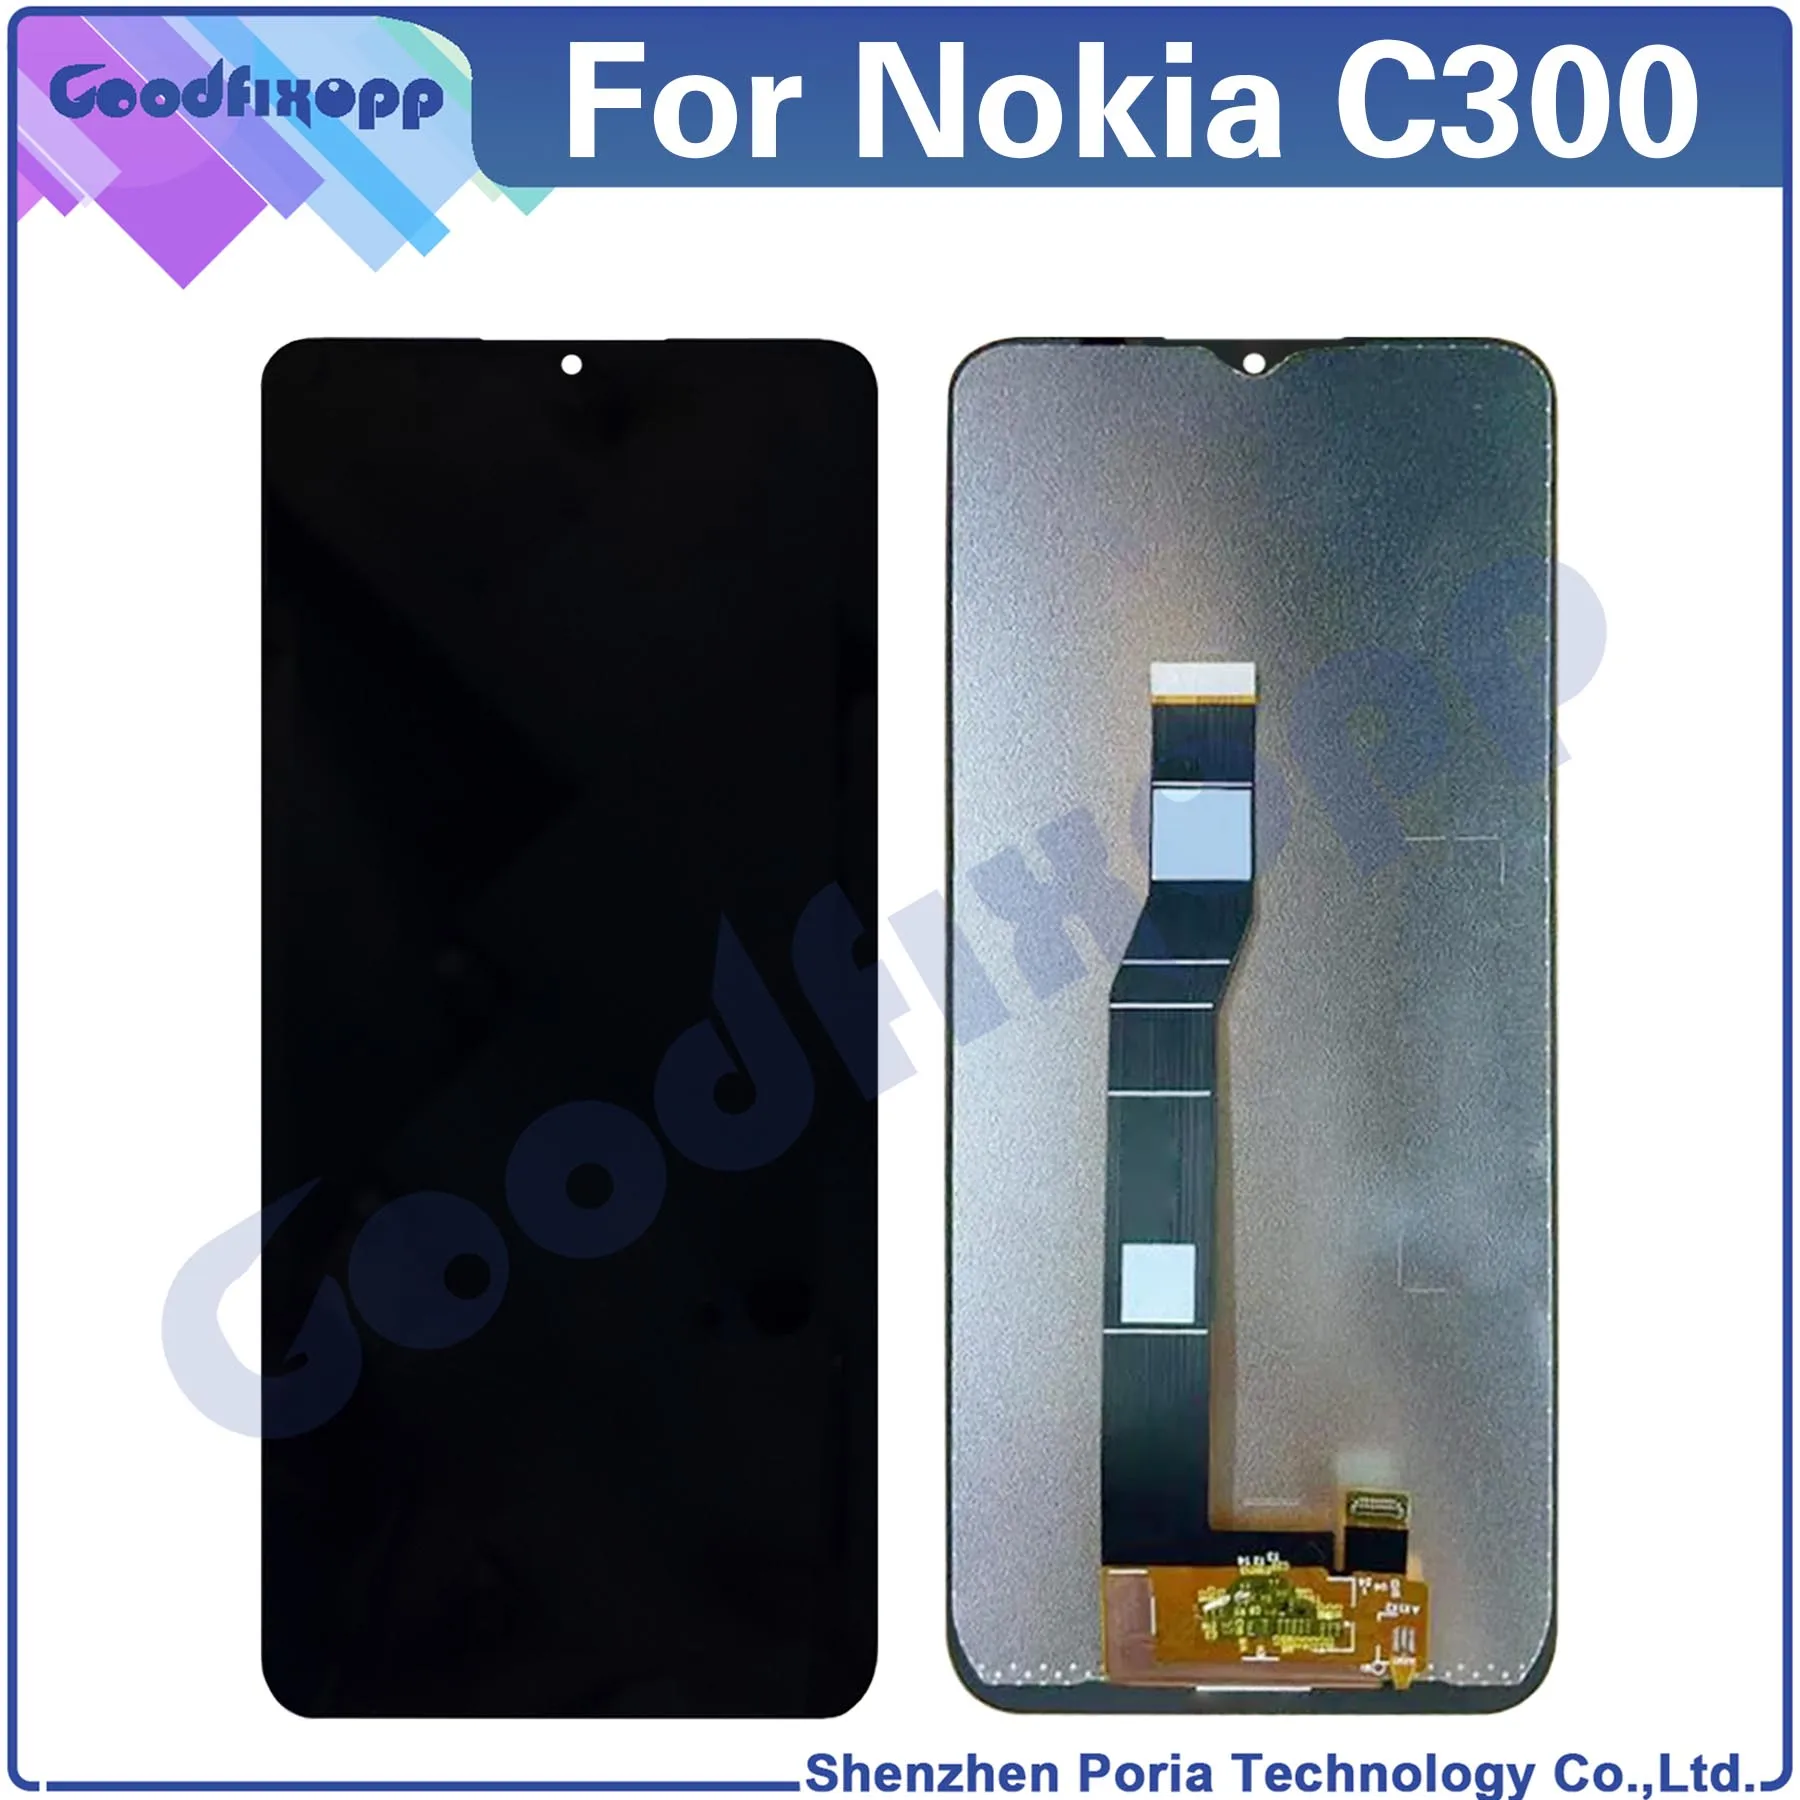 

For Nokia C300 LCD Display Touch Screen Digitizer Assembly Repair Parts Replacement